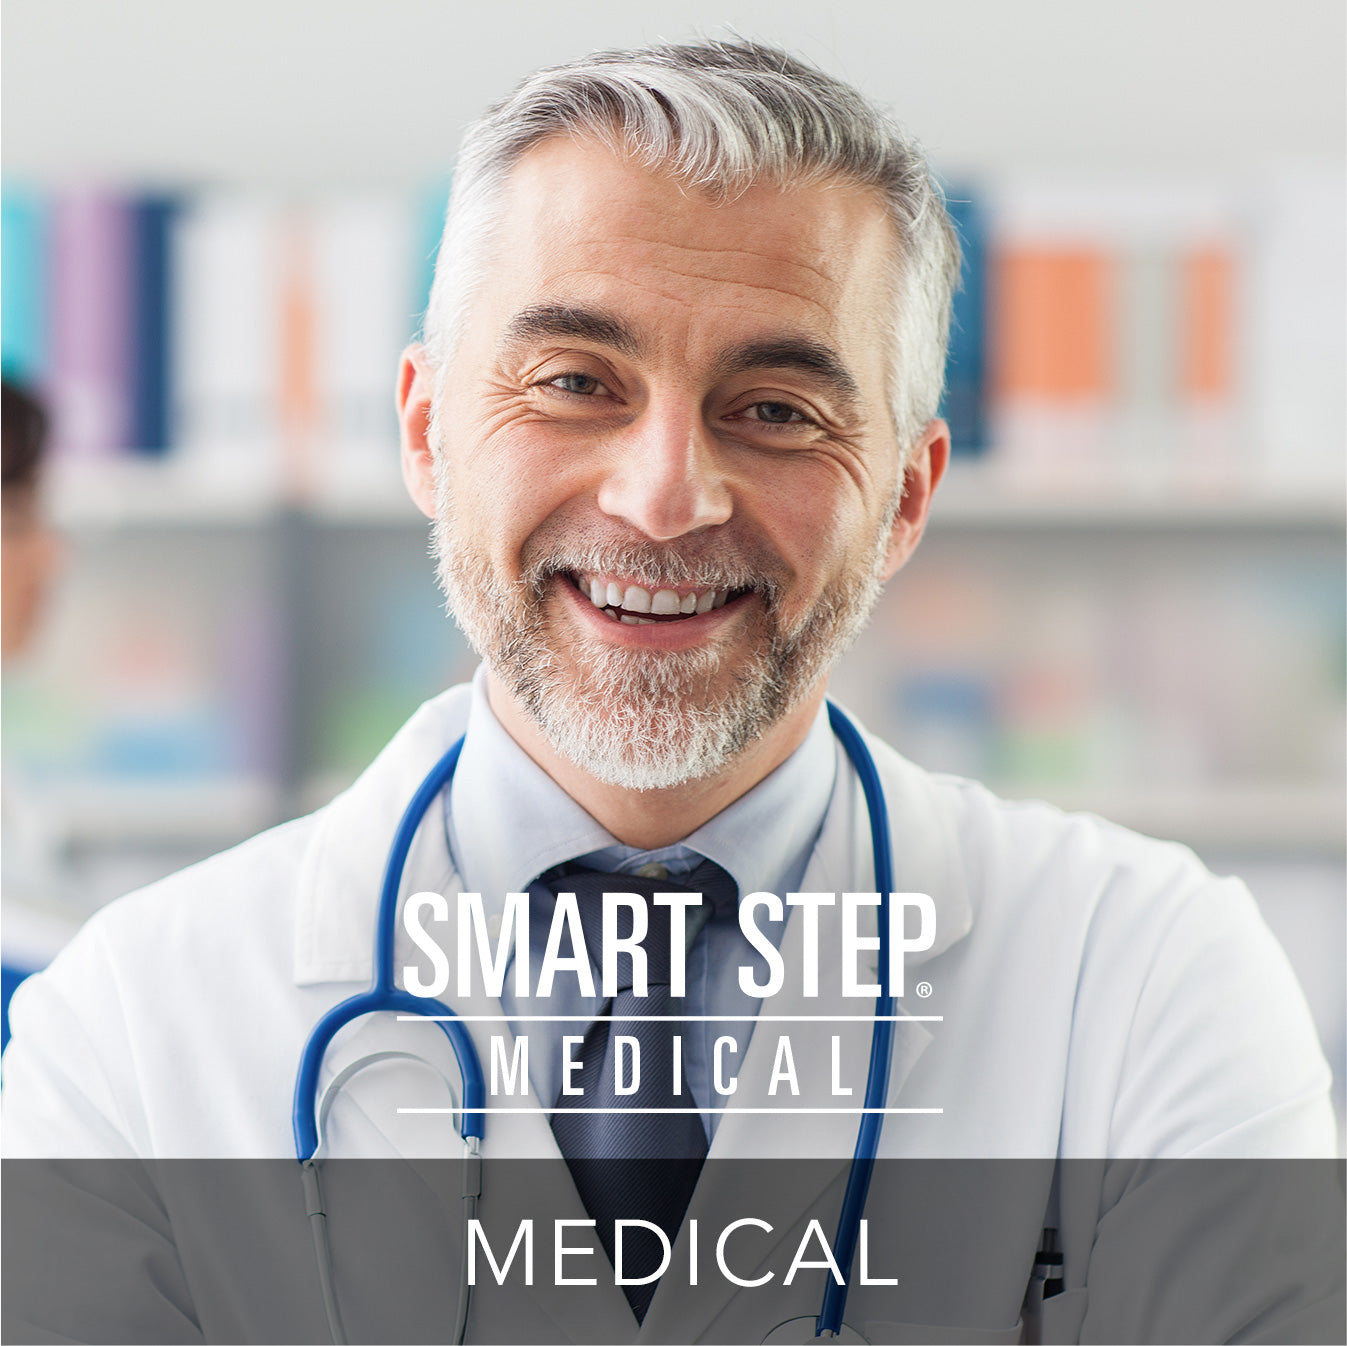 Smart Step Premium Performance Mats – Anti-Fatigue Mats for Healthcare and Wellness